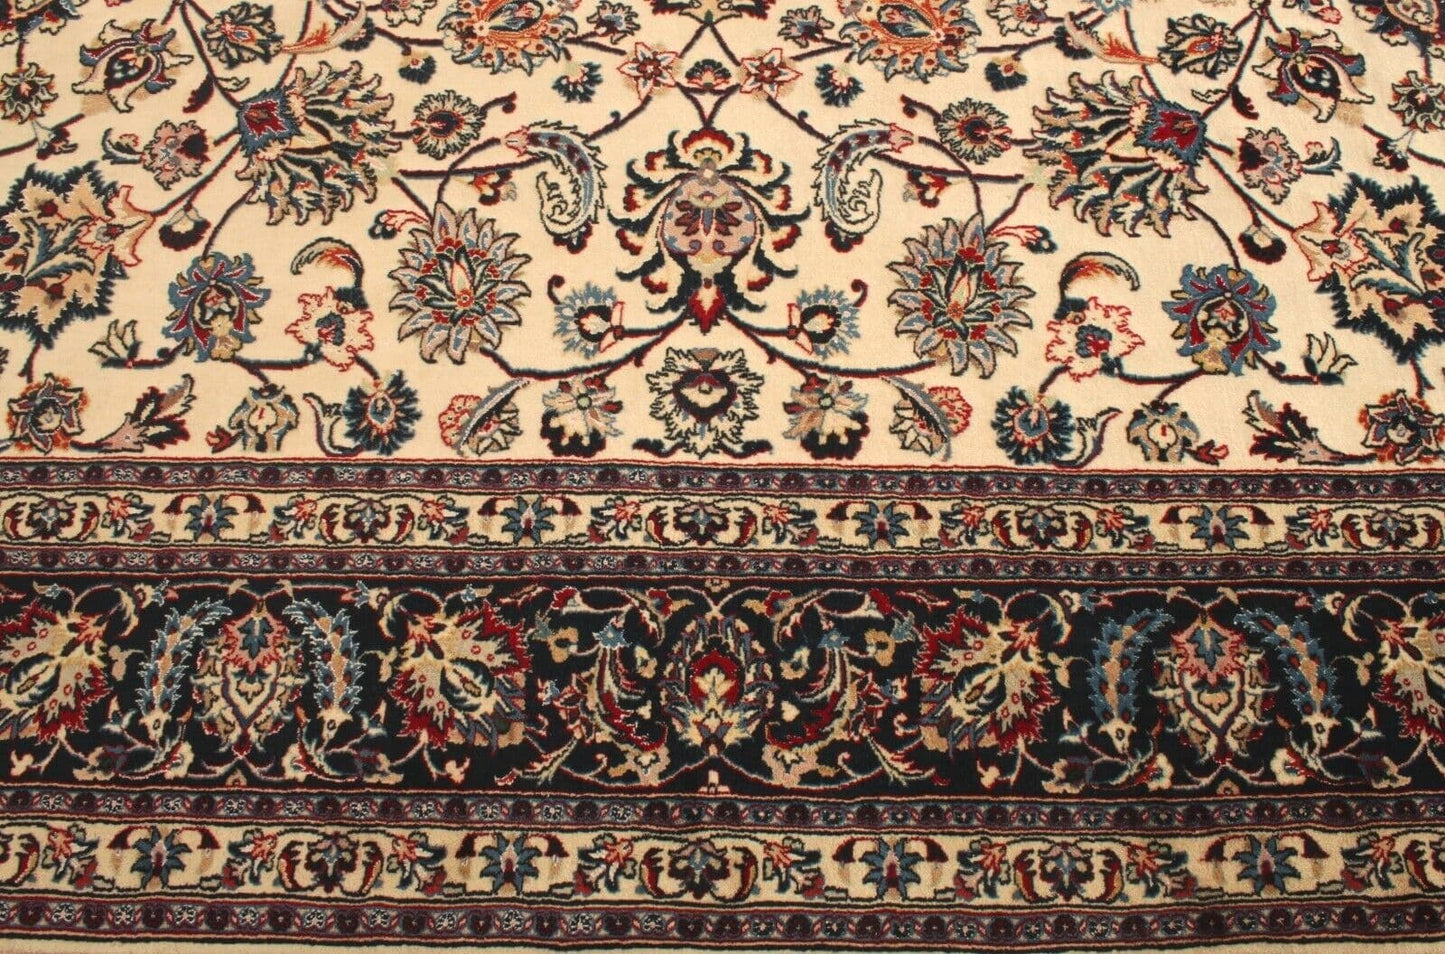 Detailed close-up of the floral motifs on the Handmade Contemporary Persian Style Tabriz Rug